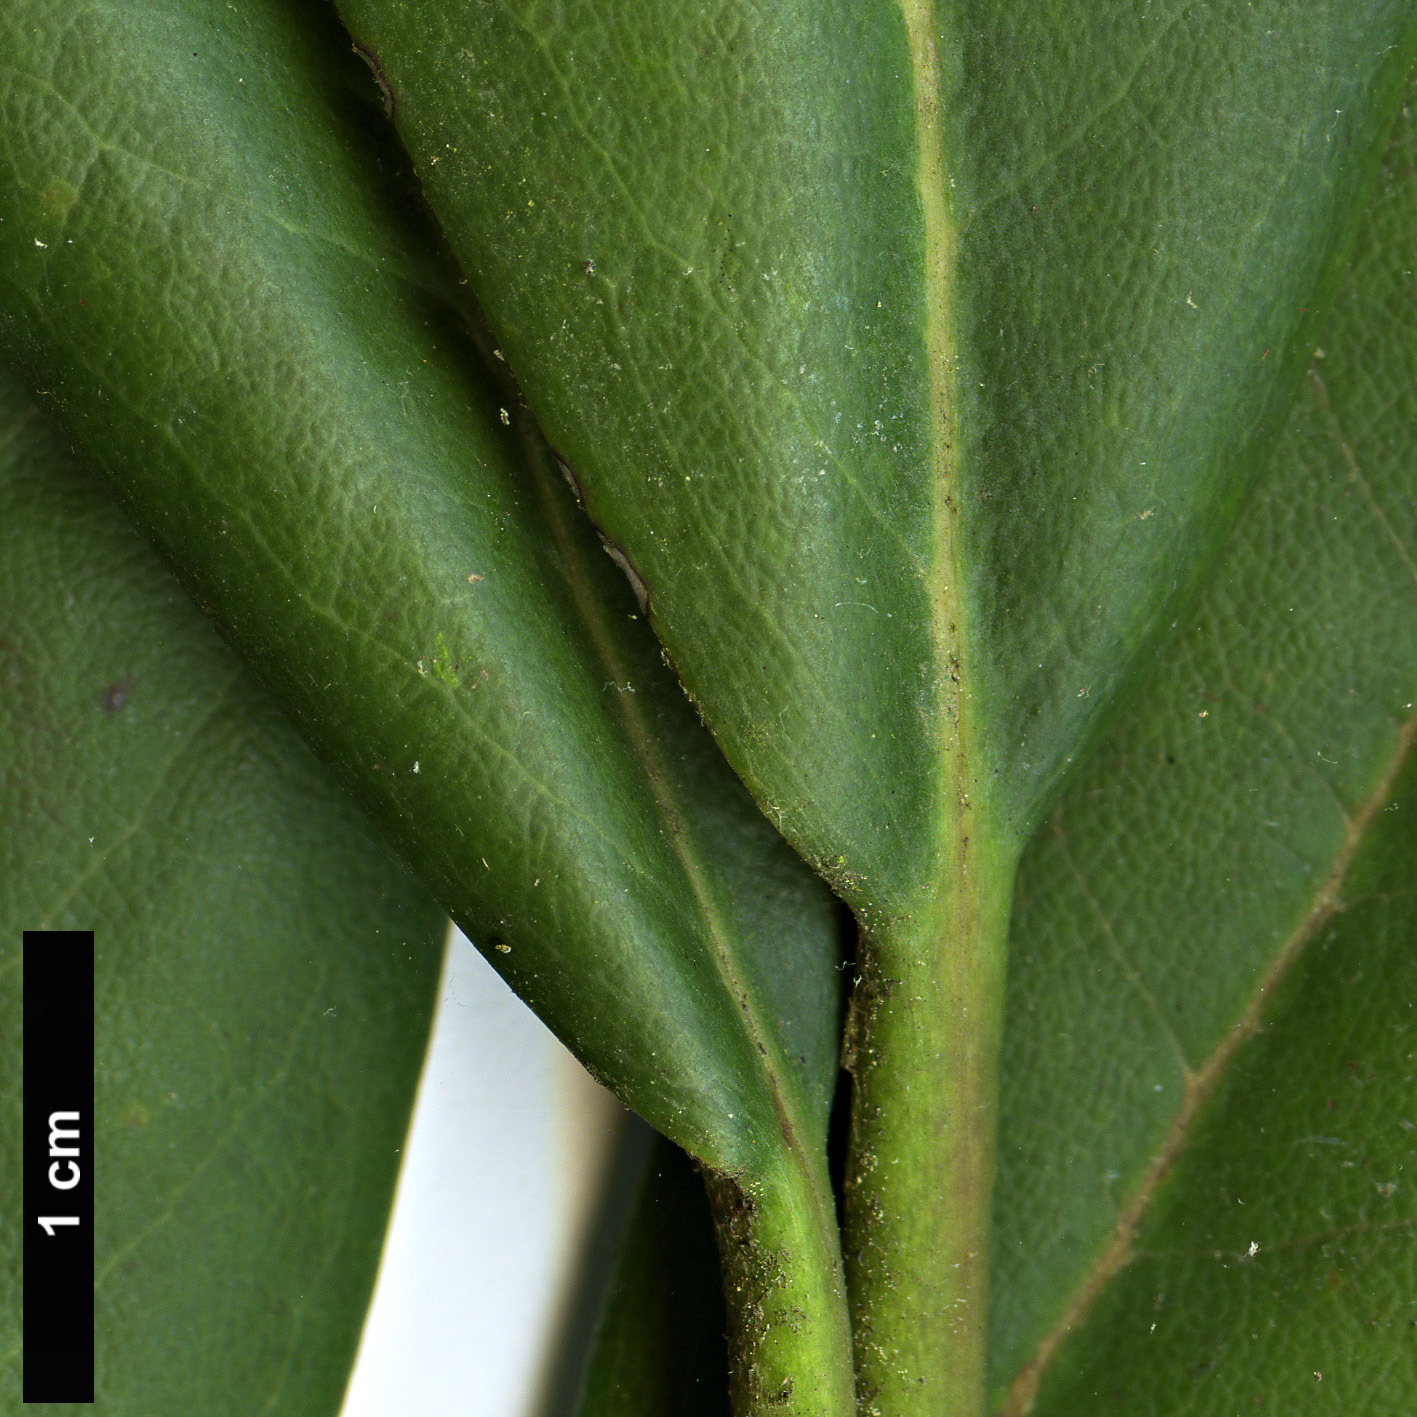 High resolution image: Family: Ericaceae - Genus: Rhododendron - Taxon: ungernii